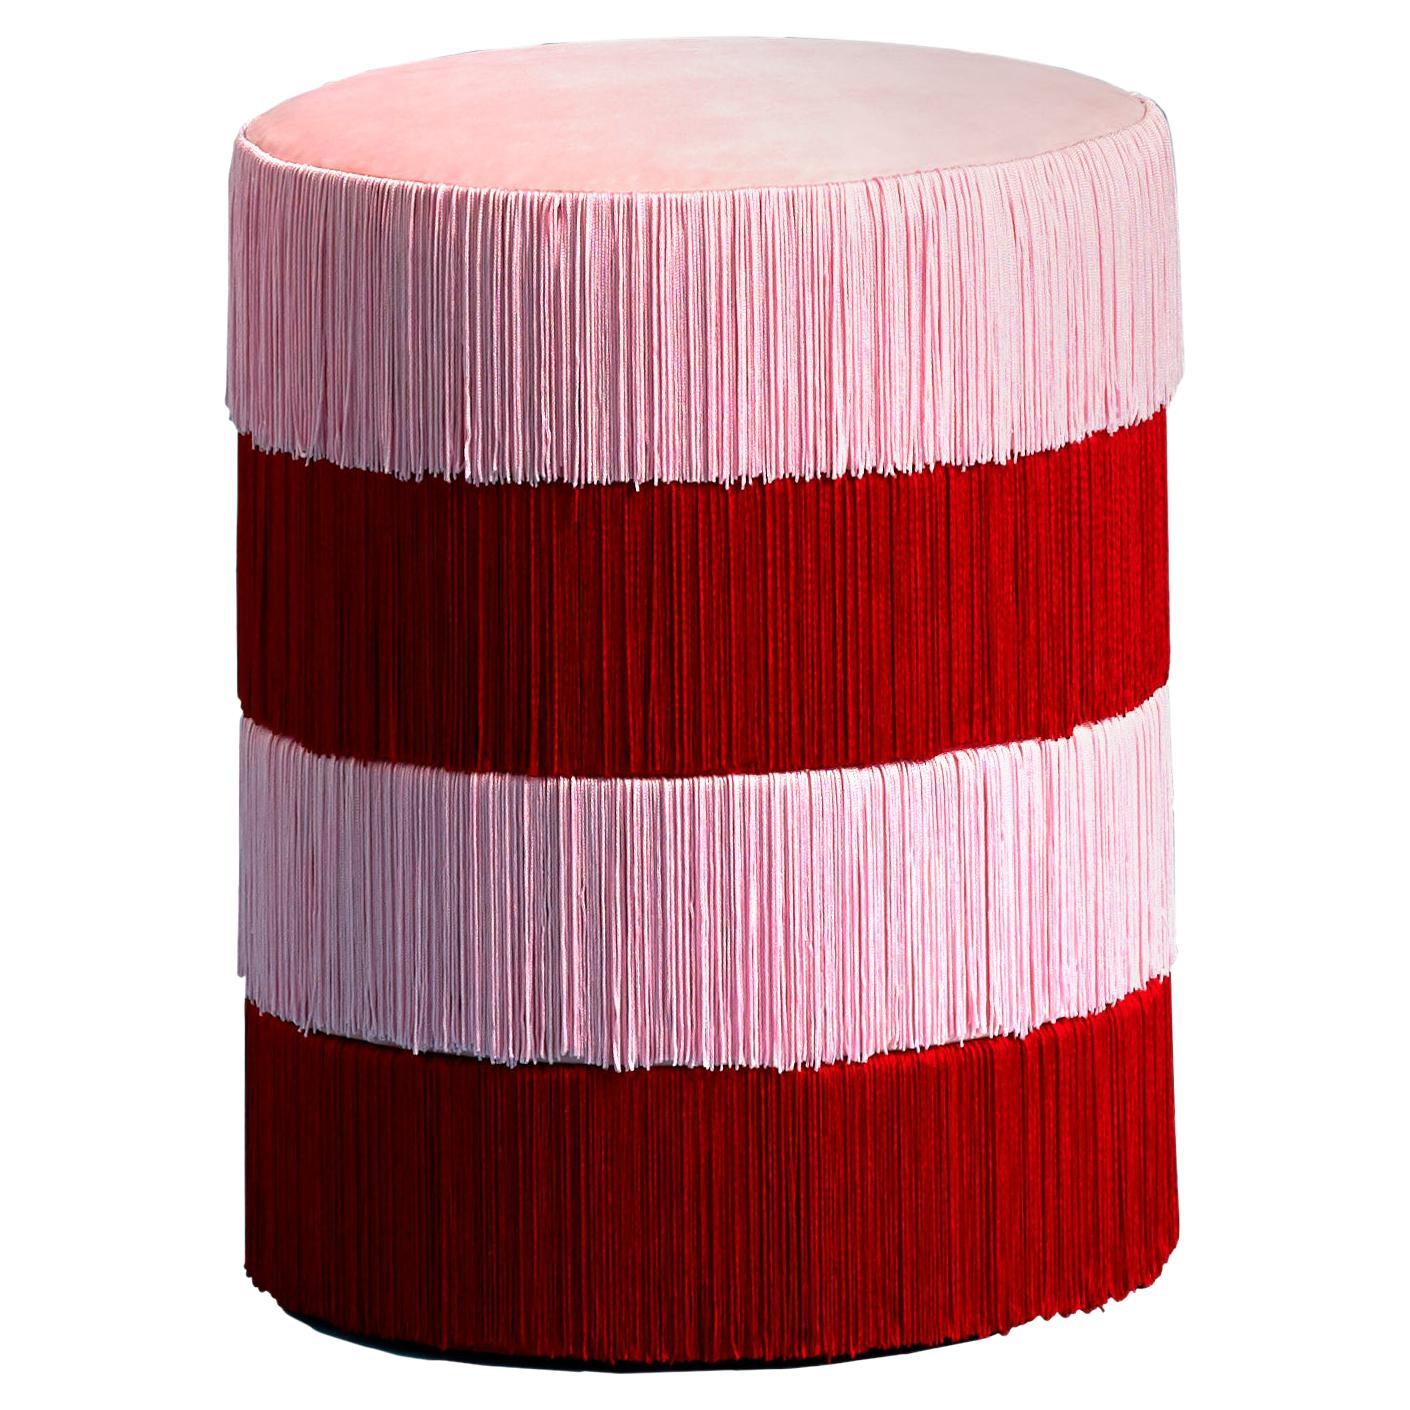 ChaChaCha Pouf by Houtique, Pink and Red